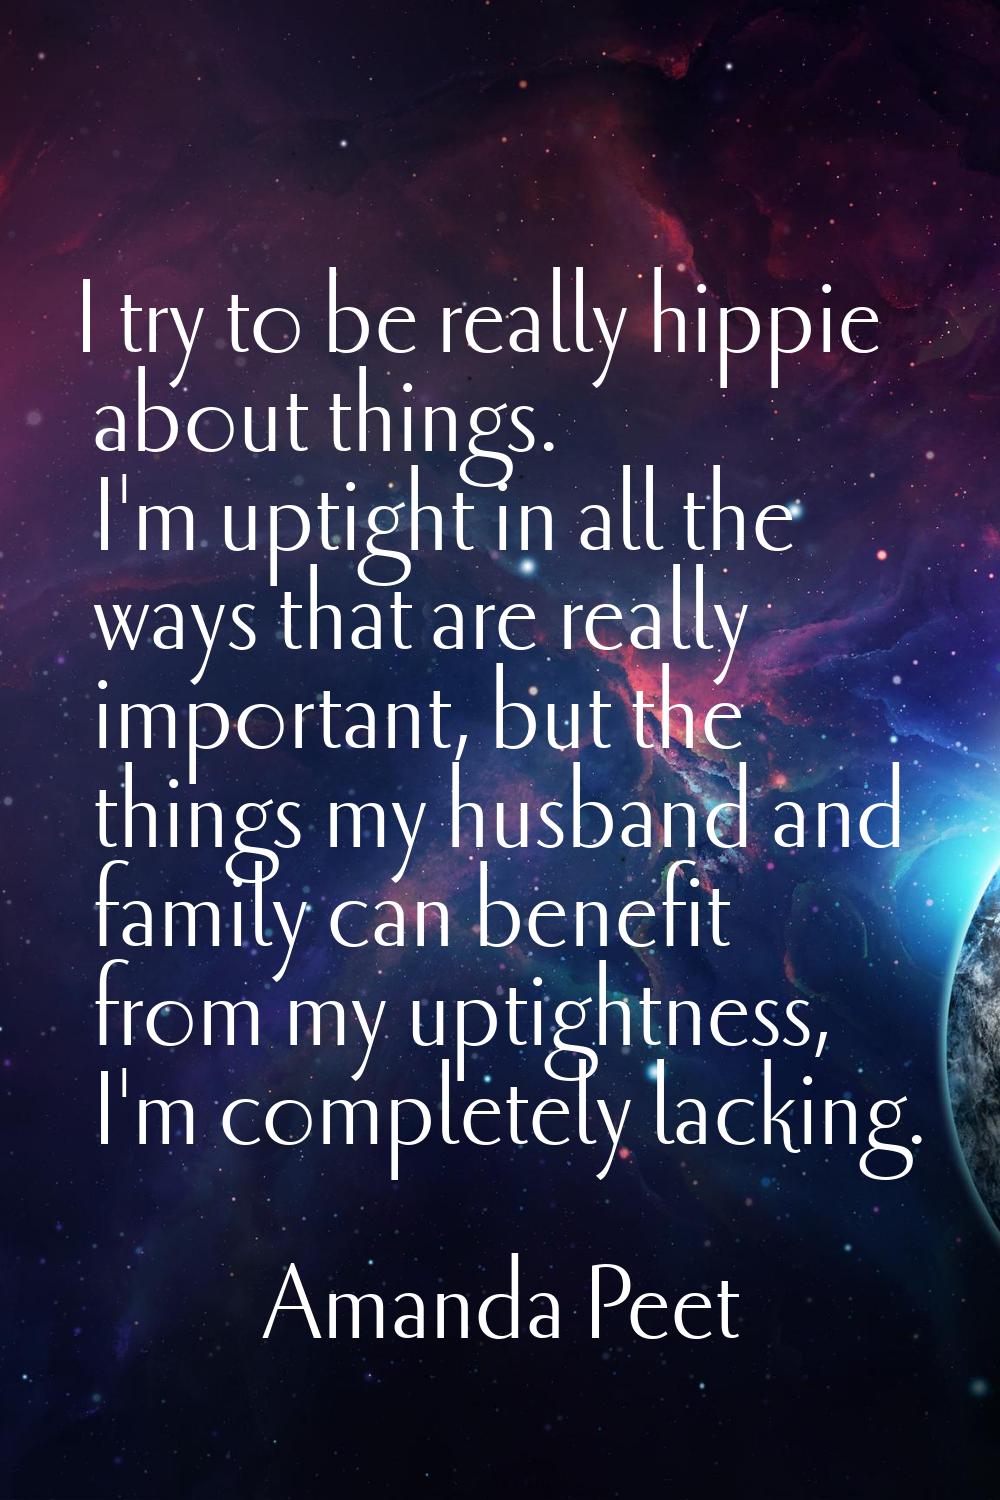 I try to be really hippie about things. I'm uptight in all the ways that are really important, but 